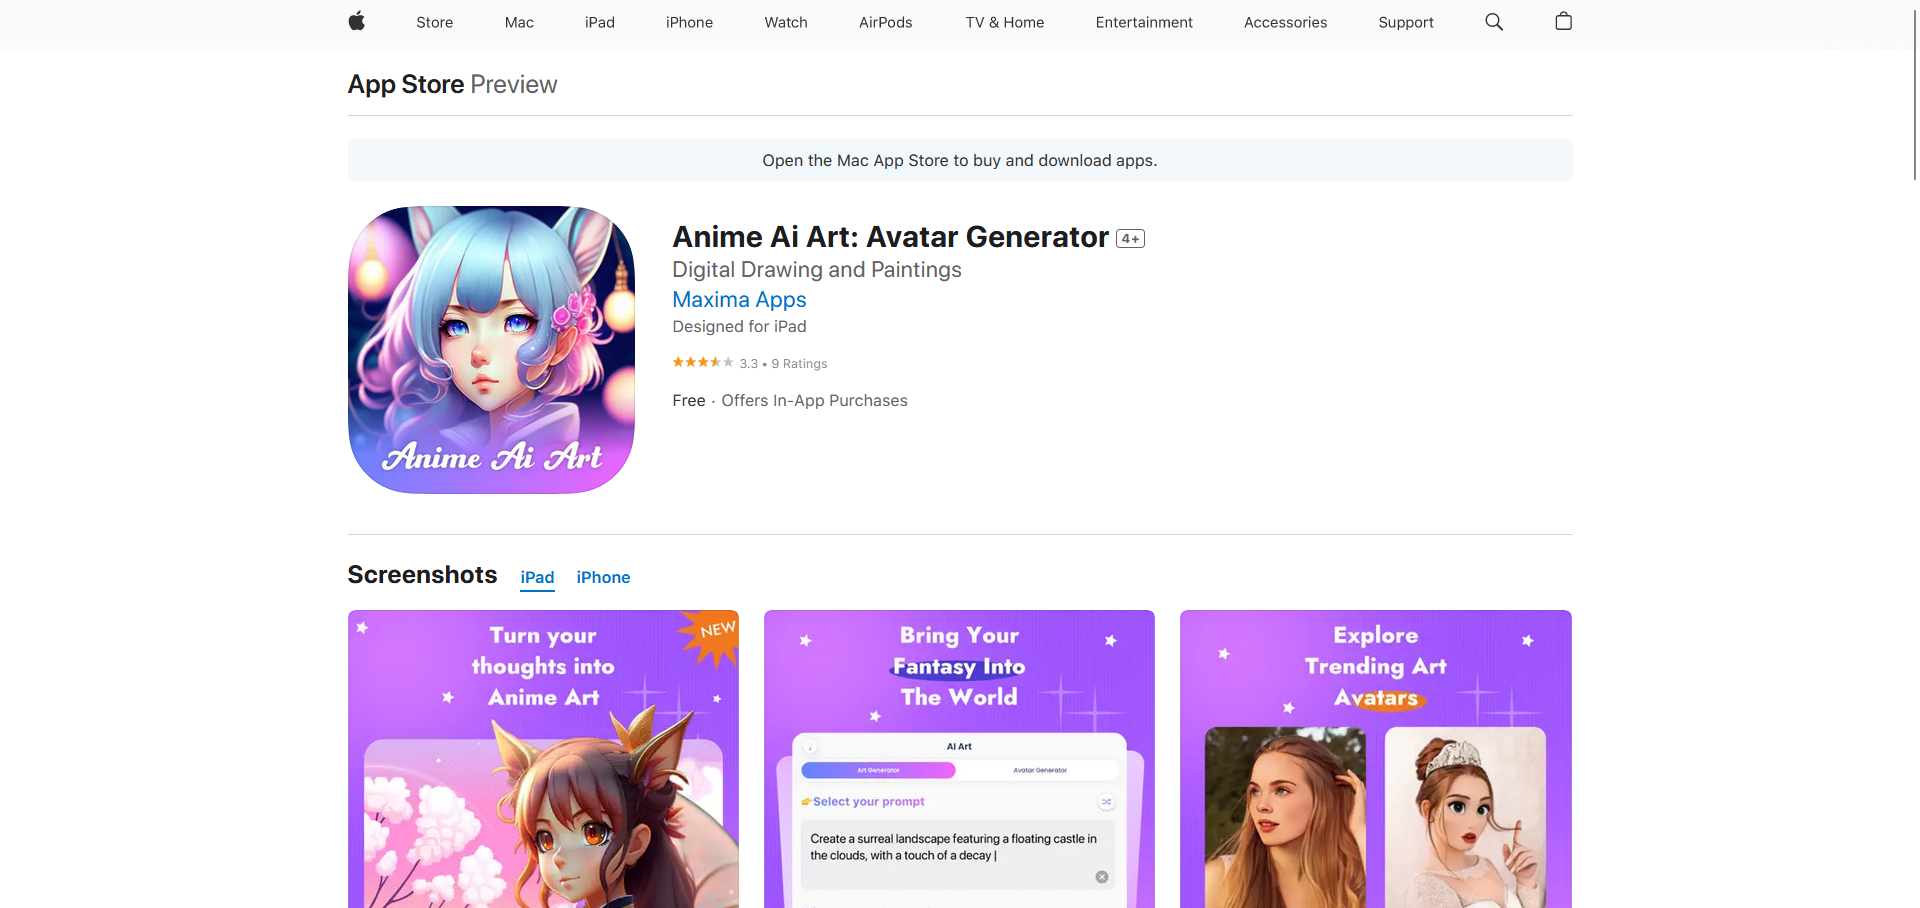  Try out Anime Ai Art: Avatar Generator tool and